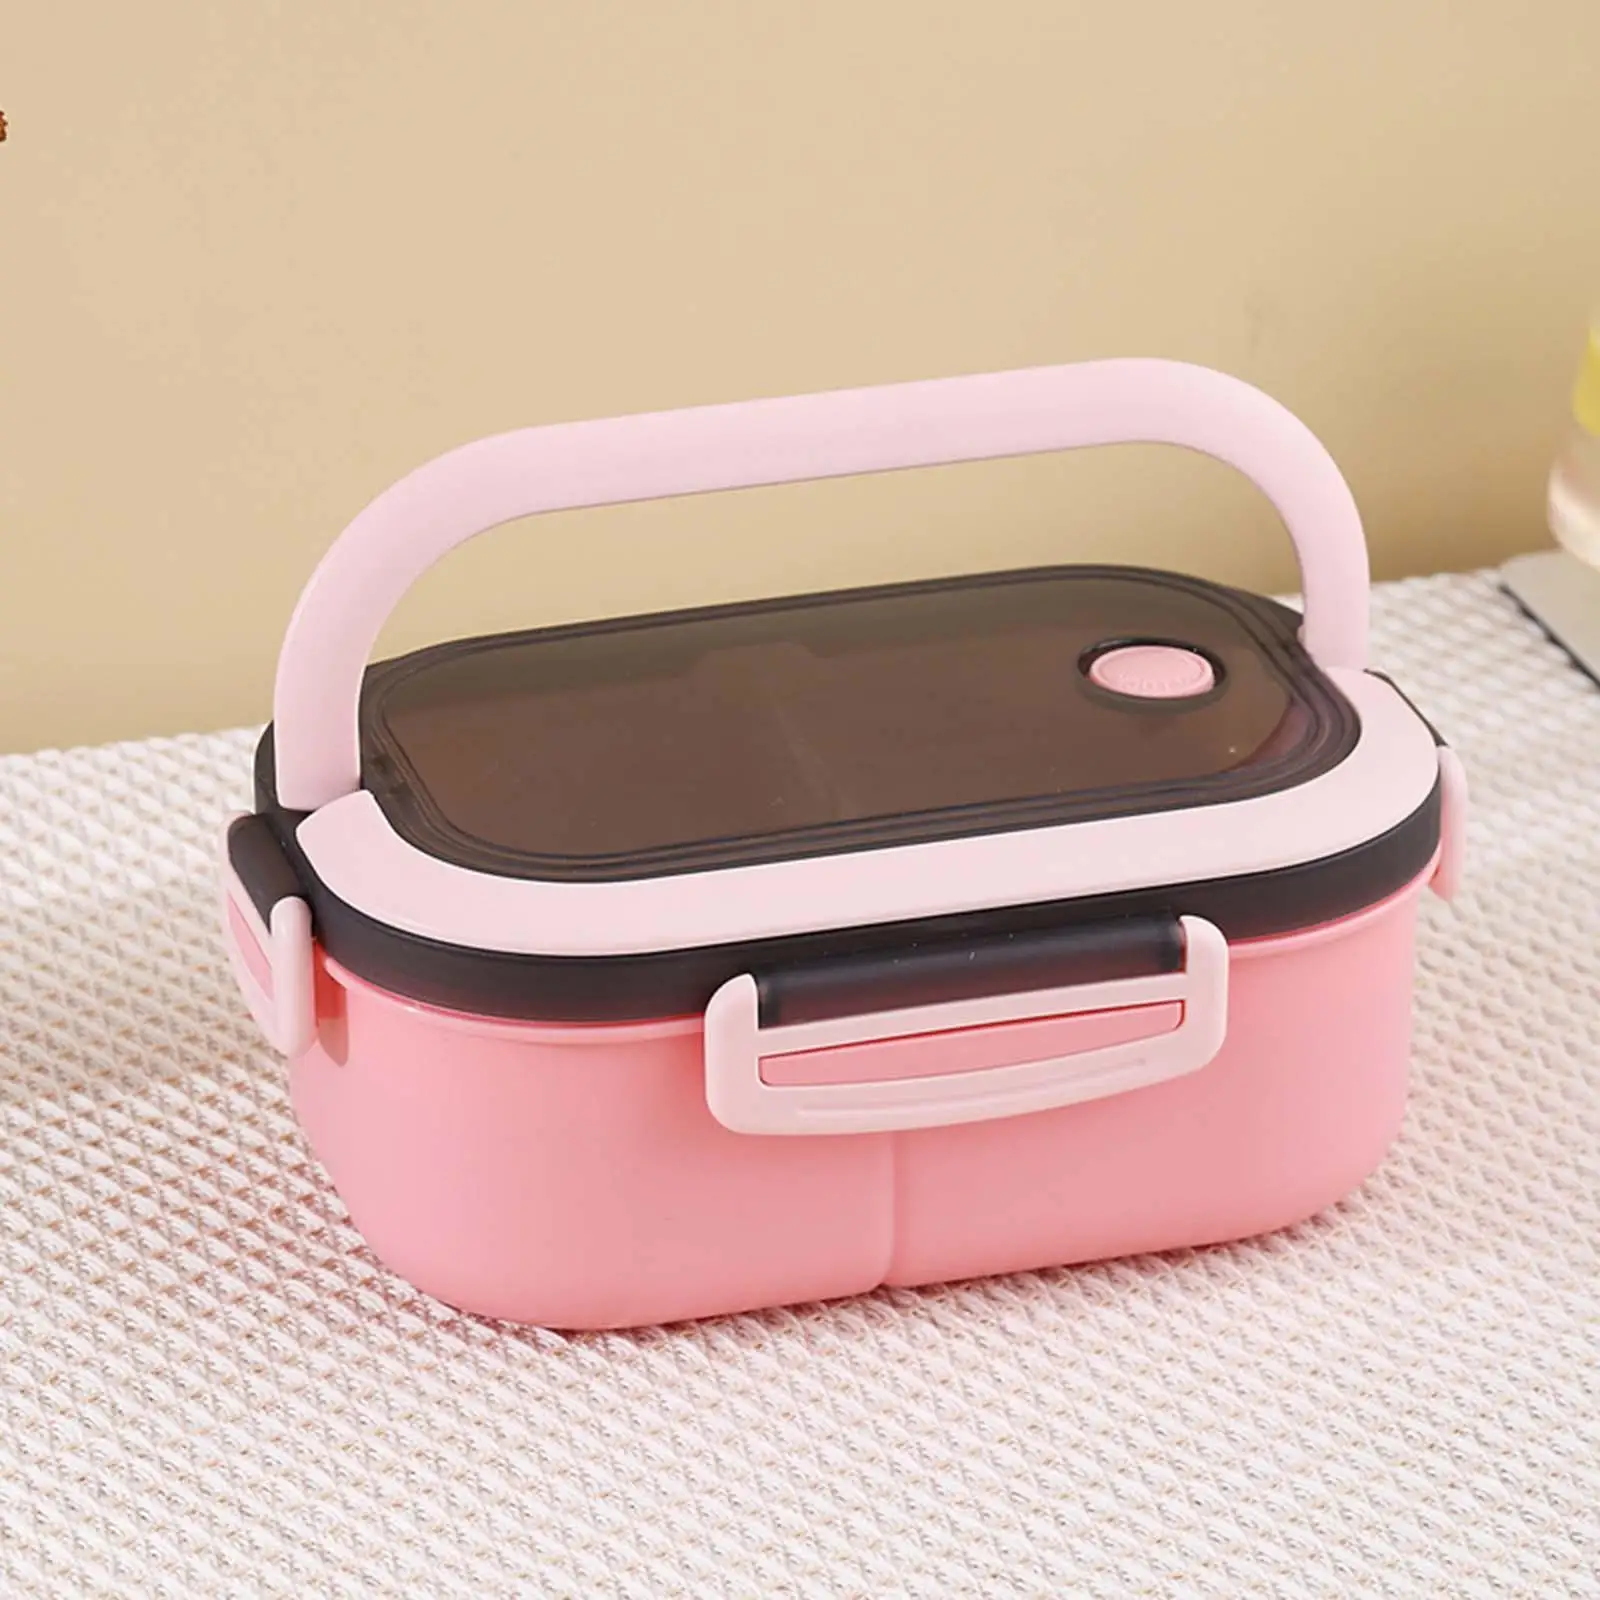 Airtight Lunchbox Hot or Cold Food Storage 3 Divided Compartments with Handle 800ml Bento Box for Boys Teen Girls Office School